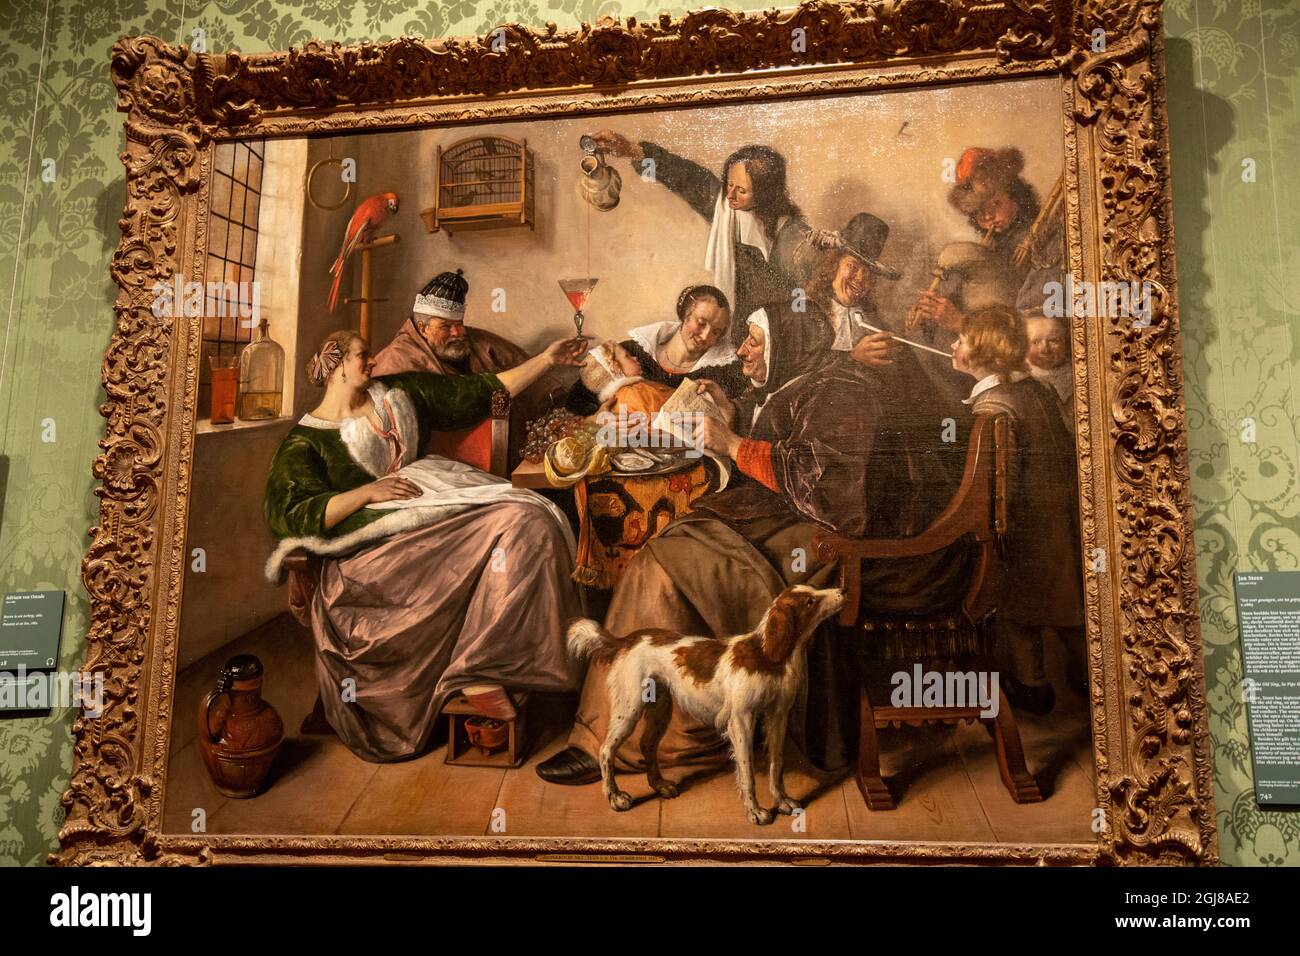 Europe, Netherlands, The Hague. Jan Steen's painting As the Old Sing So Pipe the Young. (Editorial Use Only) Stock Photo